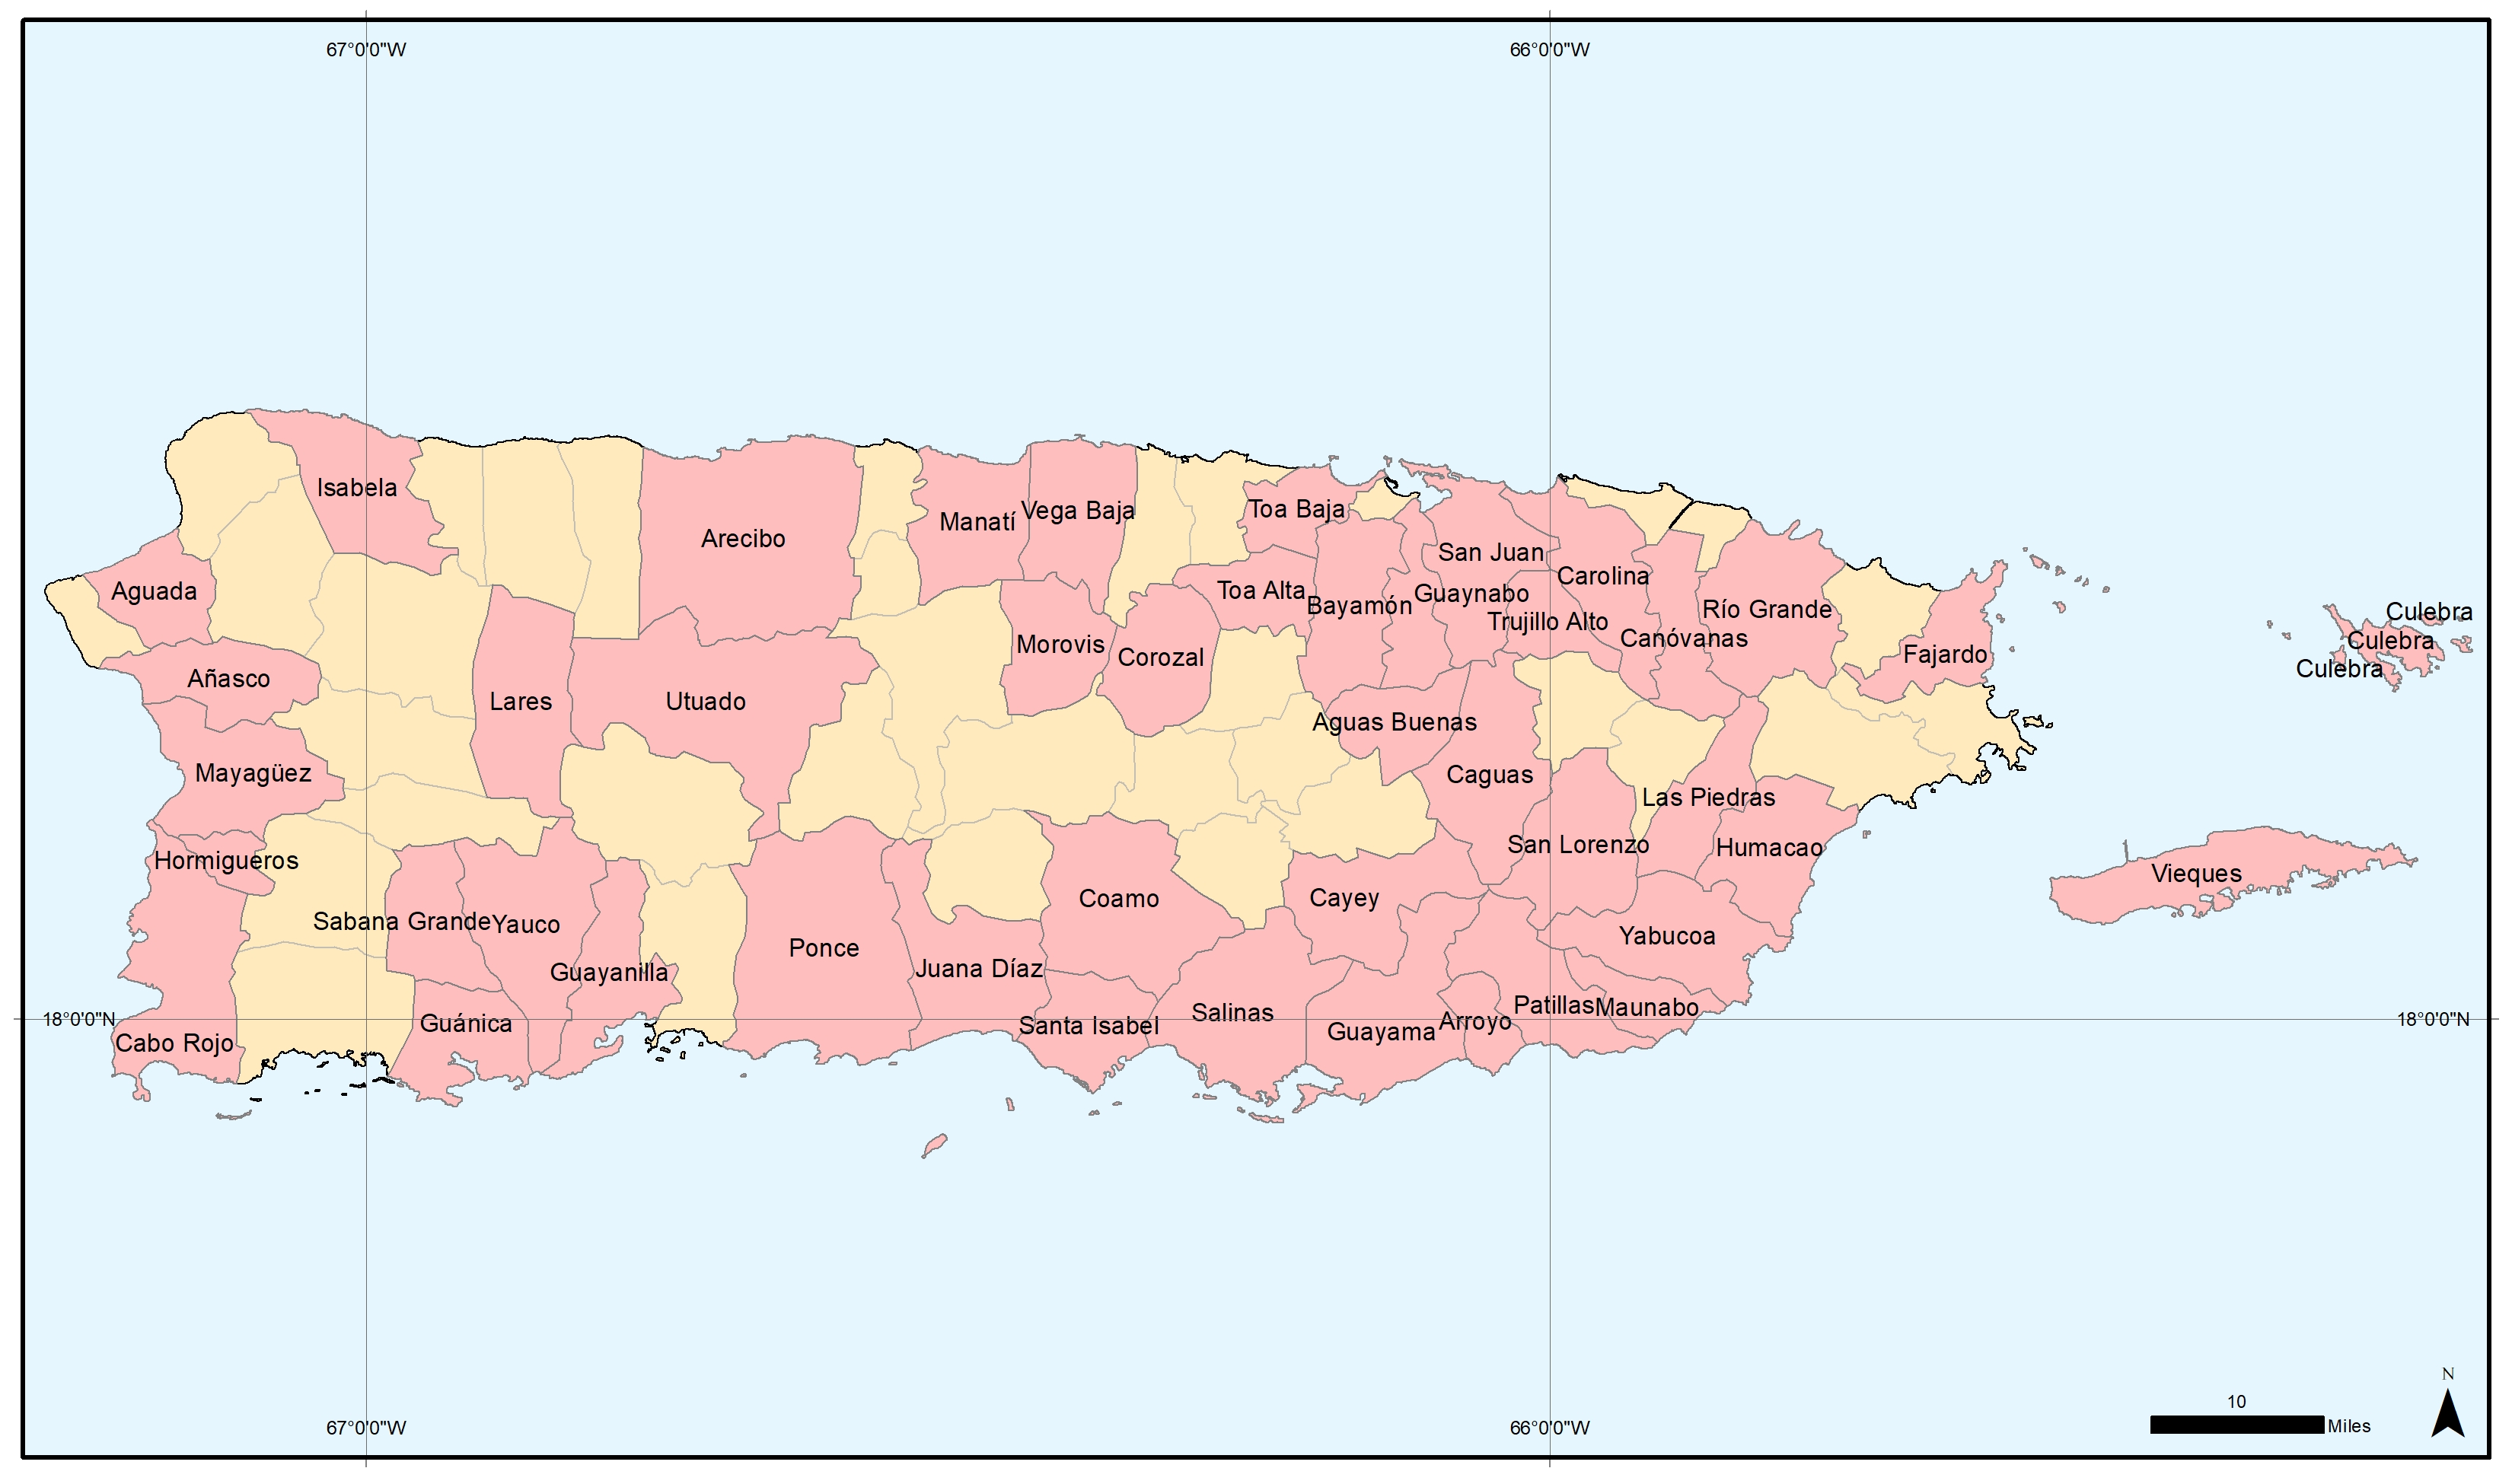 Map of municipalities randomly selected to participate in the NCRMP socioeconomic survey.